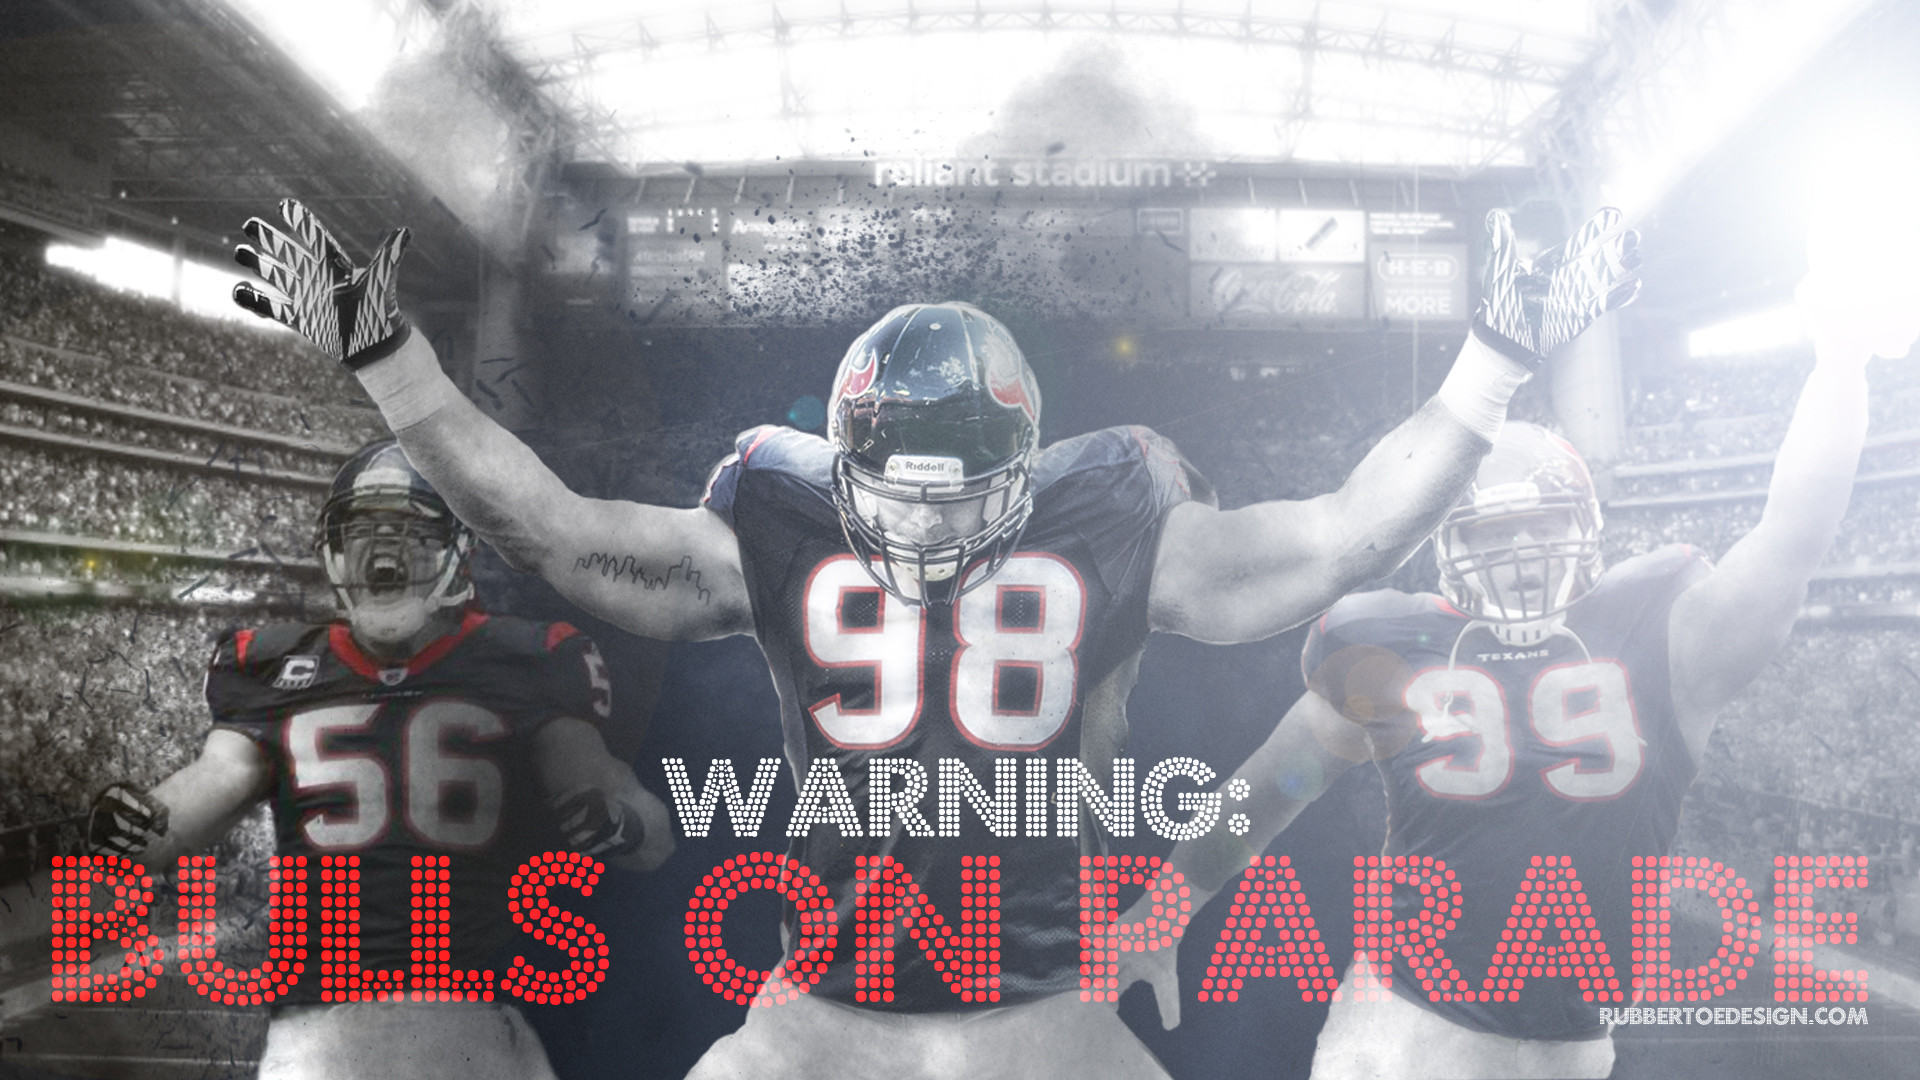 1920x1080 Bulls On Parade, looking for an AFC and NFL championship this season.